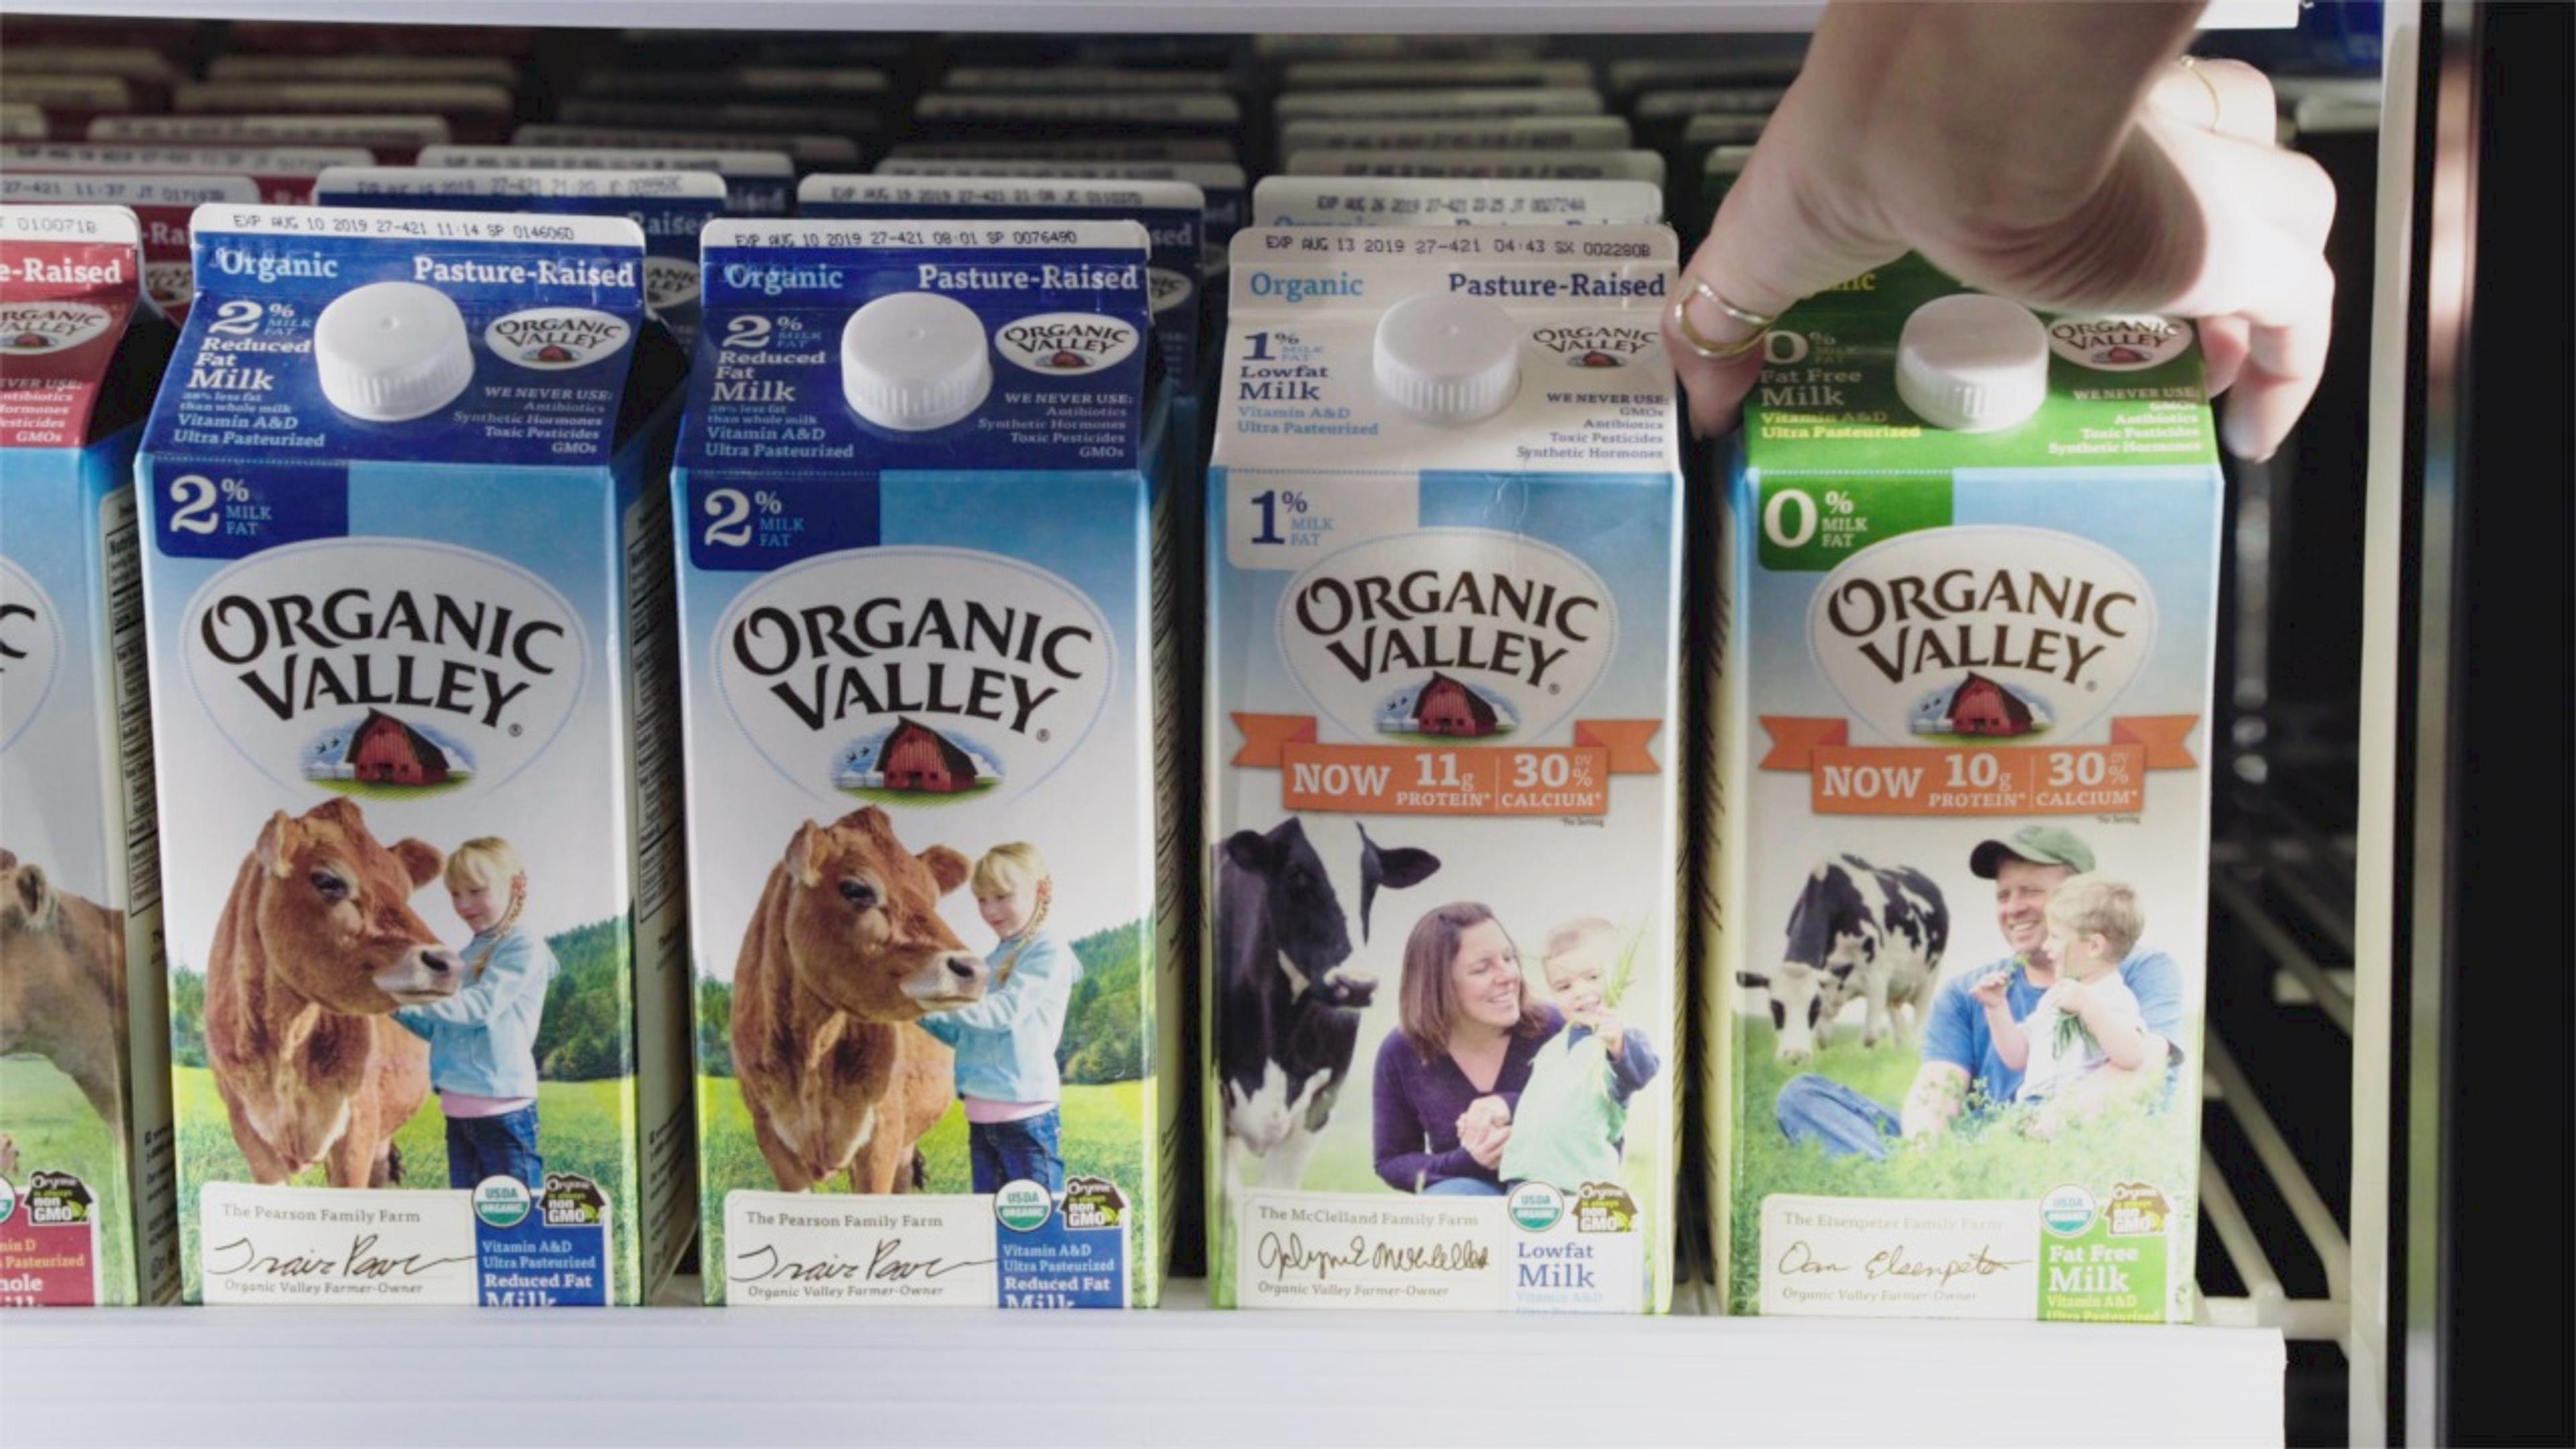 A hand reaches for a carton of Organic Valley Fortified Milk in the dairy case at a grocery store.